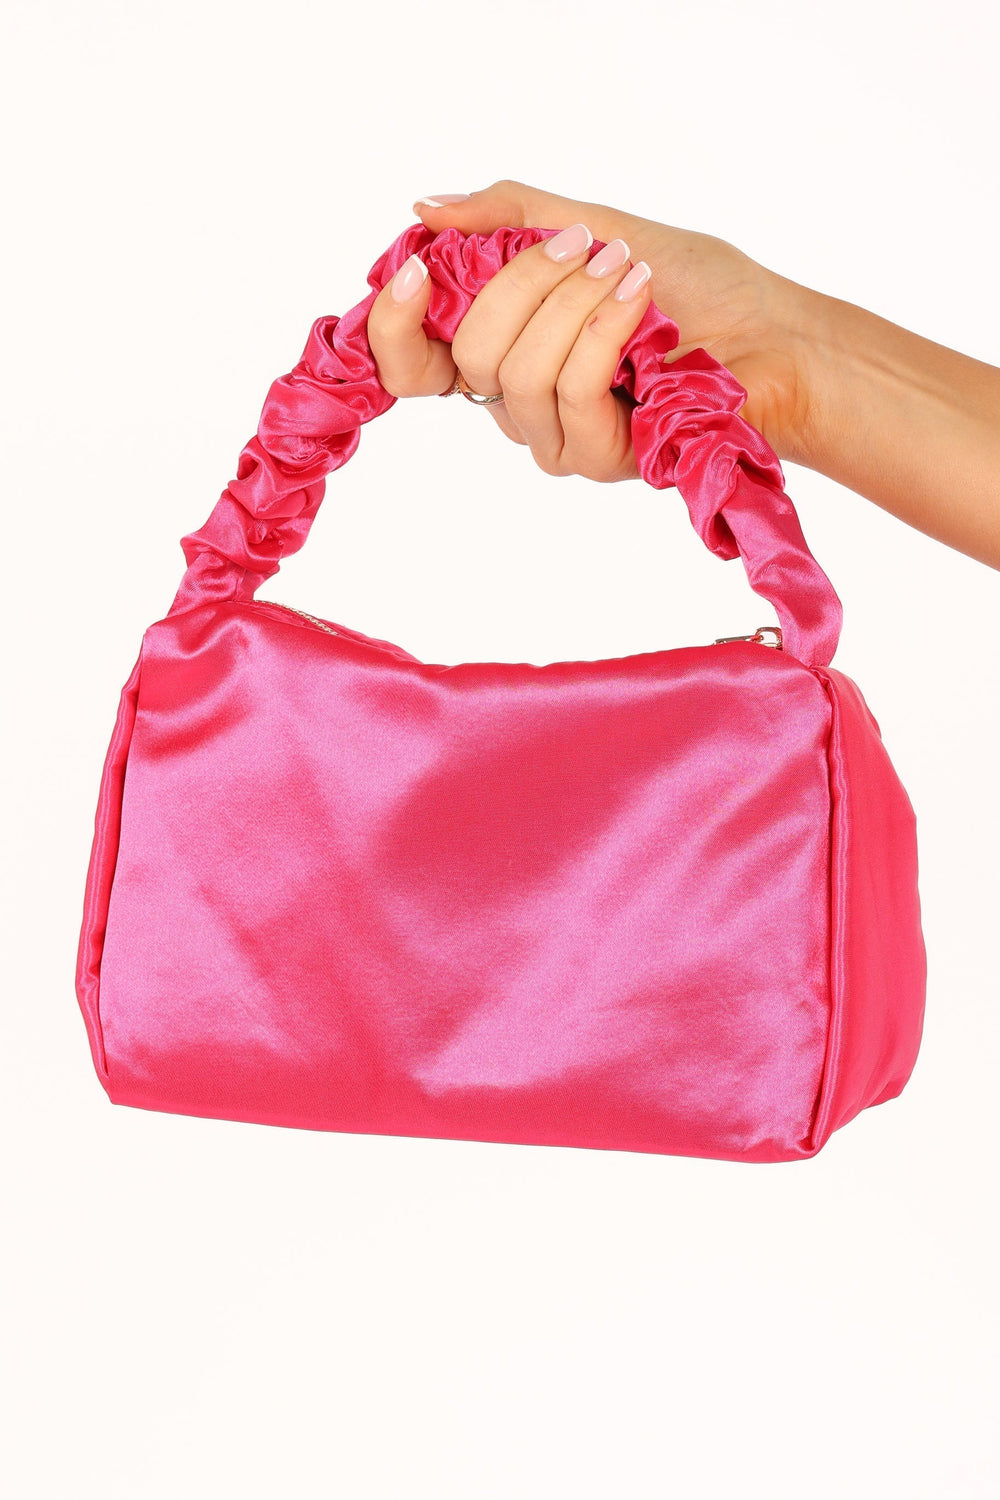 Petal and Pup USA ACCESSORIES Mira Satin Bag - Pink One Size